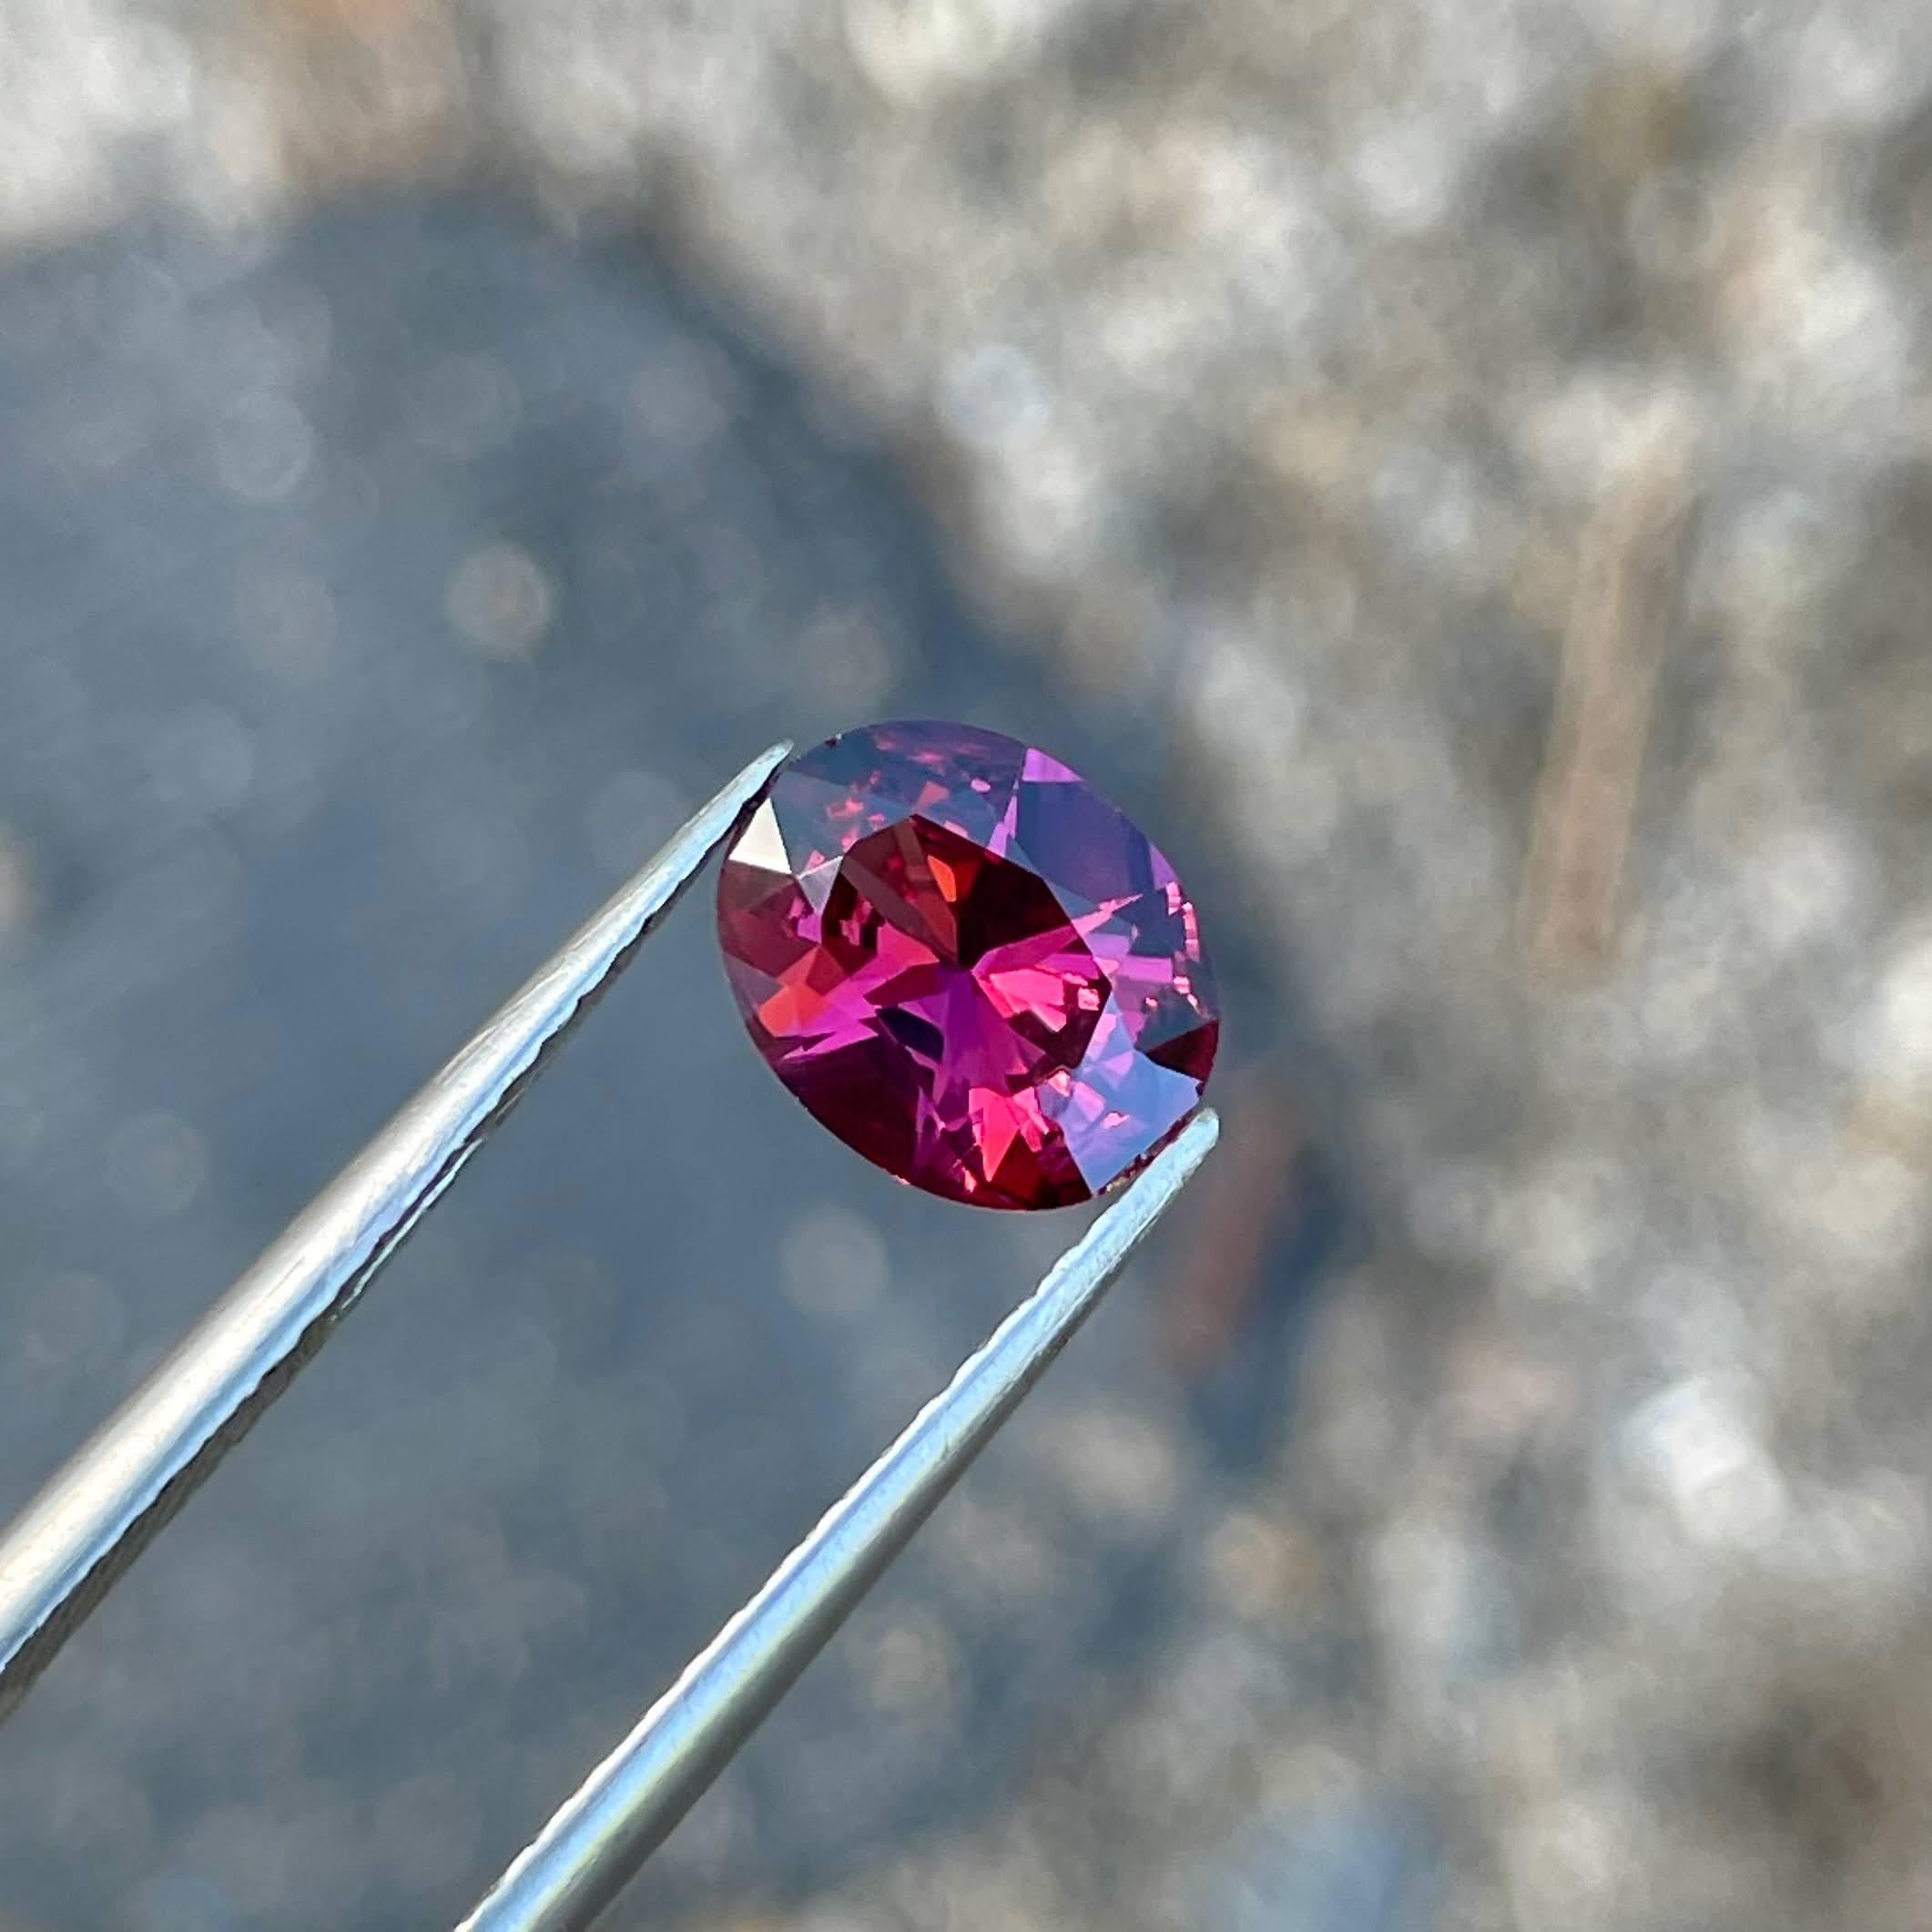 Weight 1.45 carats 
Dimensions 8.25x6.60x3.70 mm
Treatment none 
Origin Tanzania 
Clarity VVs
Shape oval 
Cut fancy oval 



The Pinkish Red Garnet Stone is a radiant gem of exquisite beauty, boasting a weighty 1.45 carats. Cut into a mesmerizing